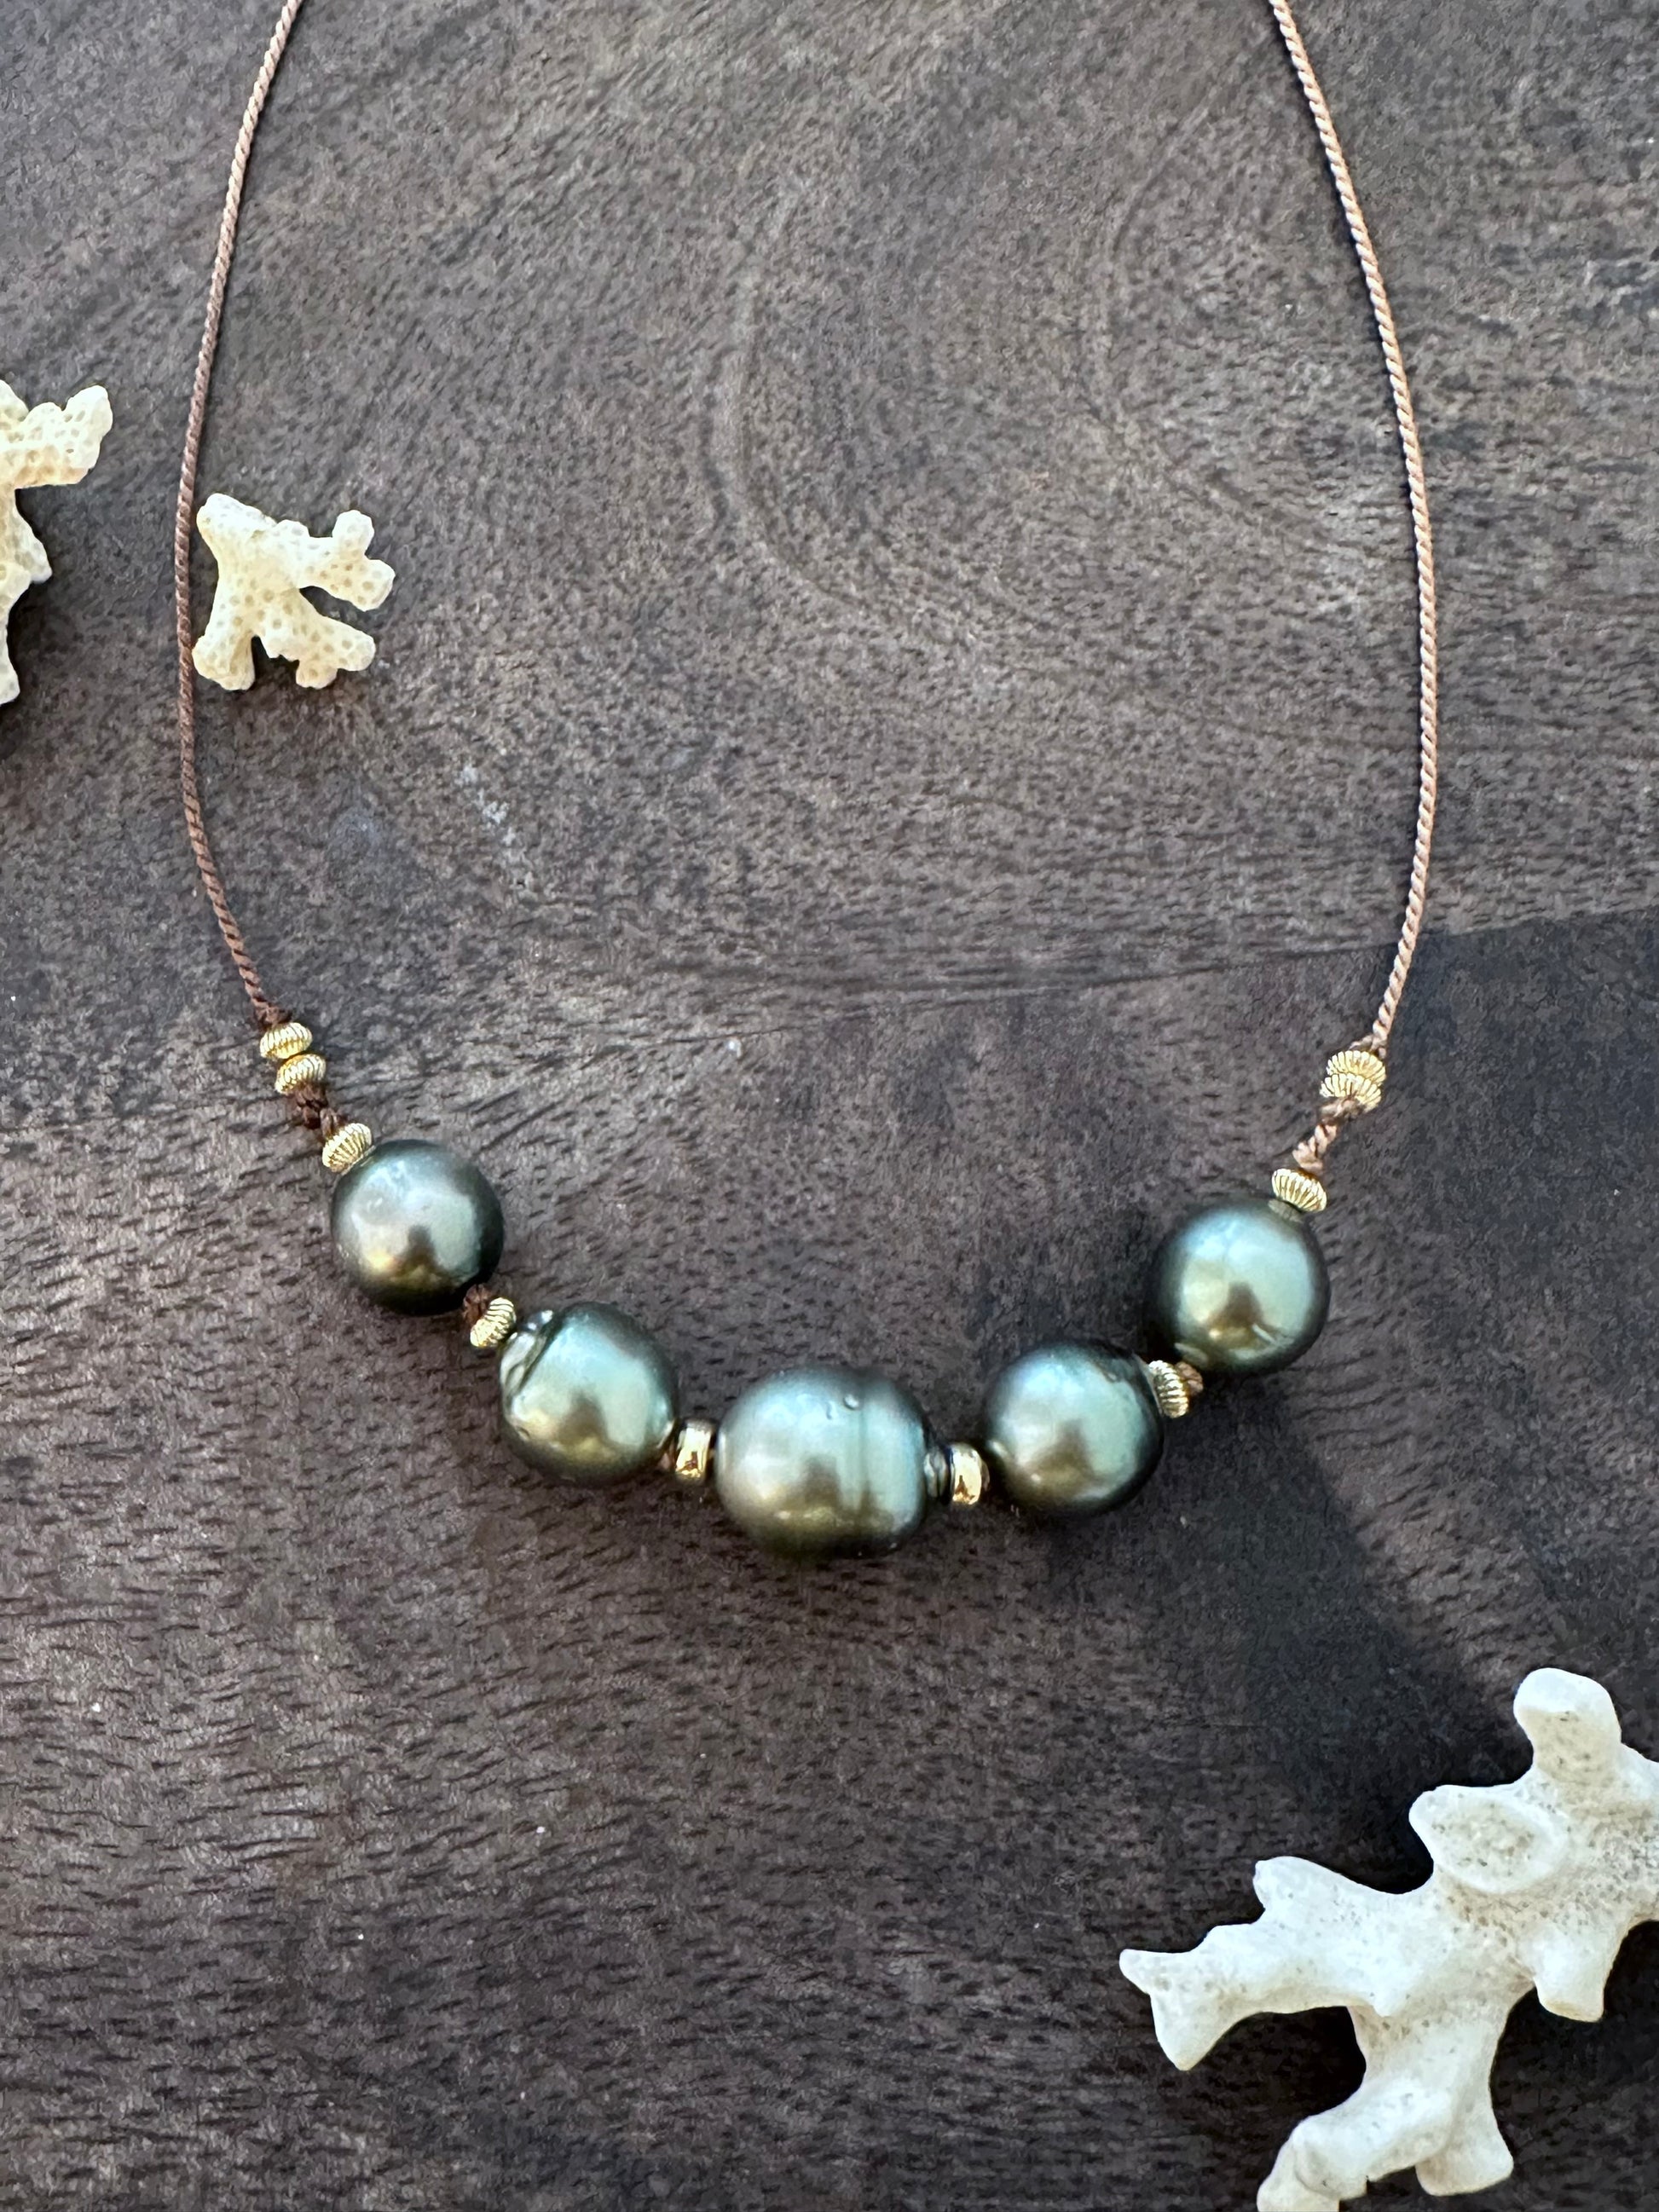 a necklace with 5 large tahitain pearls on a tan silk string with gold filled beads on a wooden background with white coral in the lower right corner and upper left corner.